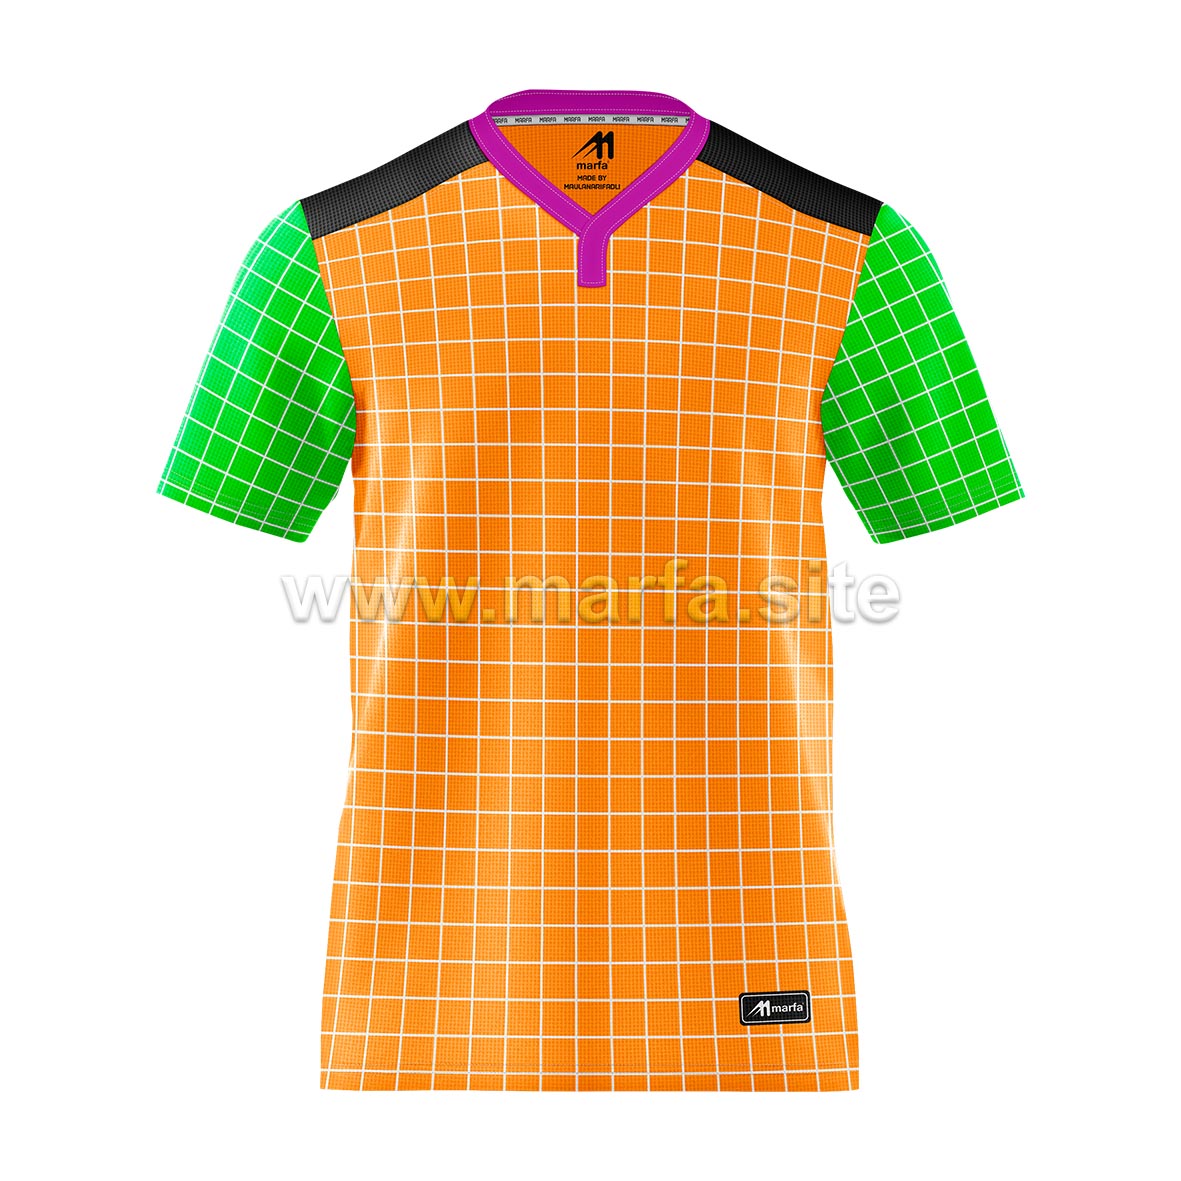 Download Diskusi TEMPLATE MOCKUP JERSEY Y NECK - PHOTOSHOP - TokoFile